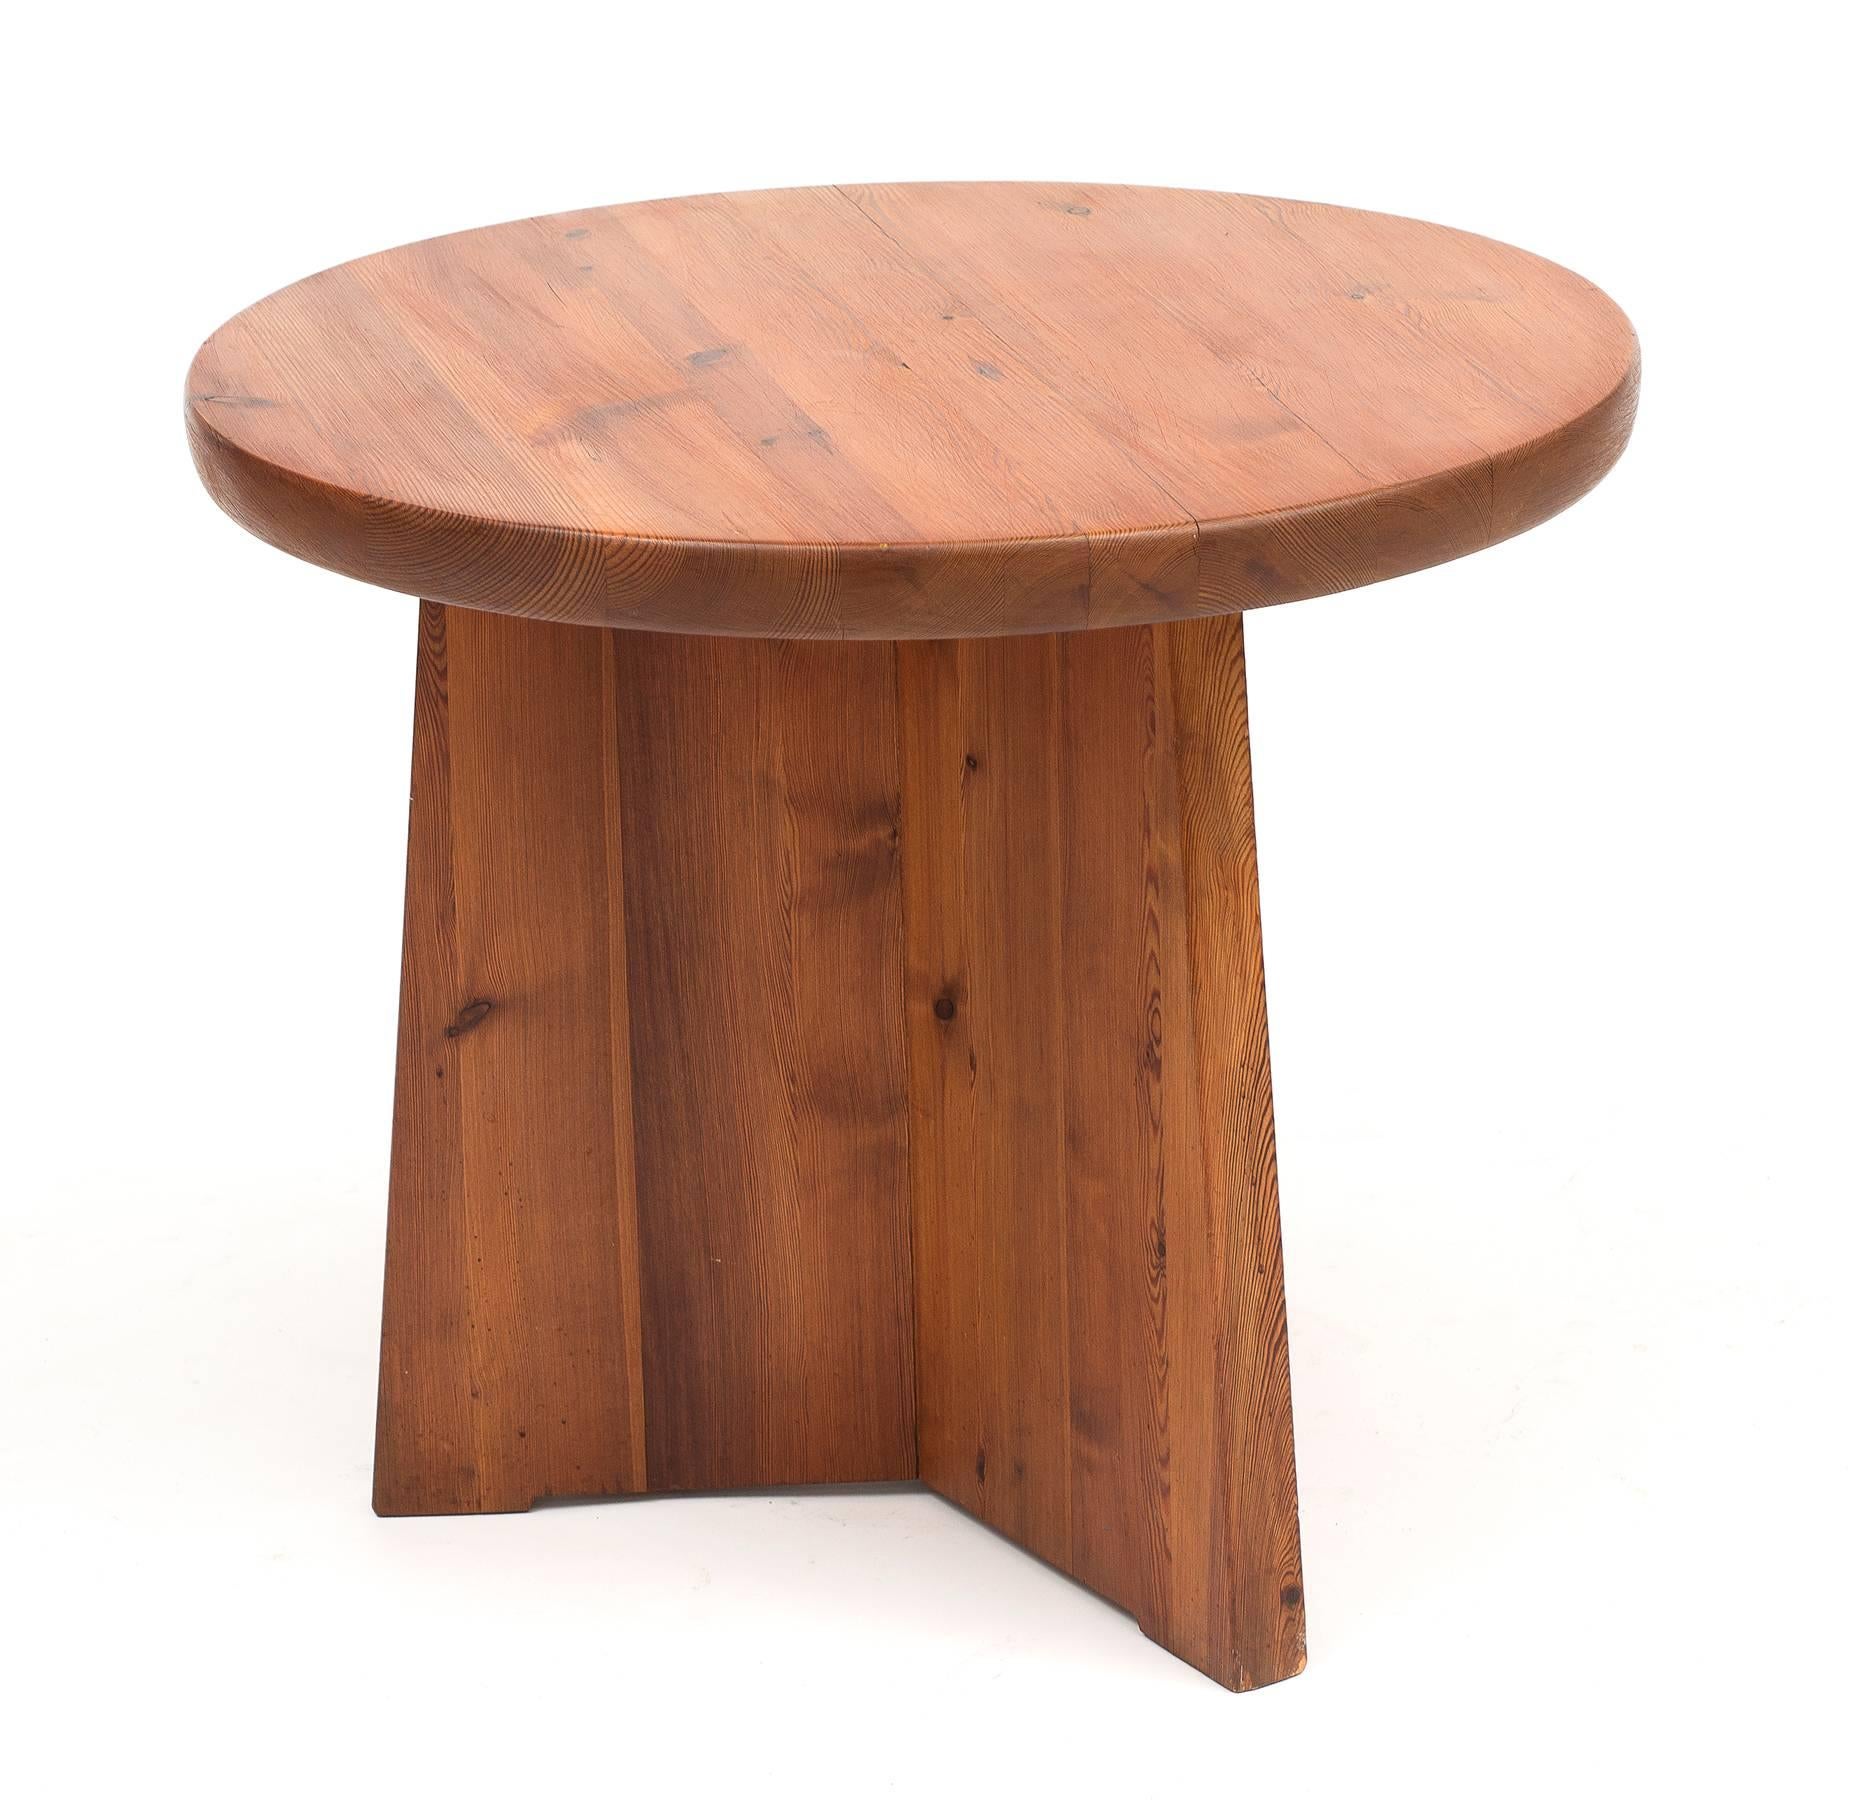 A circular Lovo coffee table of solid pine by Axel Einar Hjorth, for NK, Sweden, 1930s.